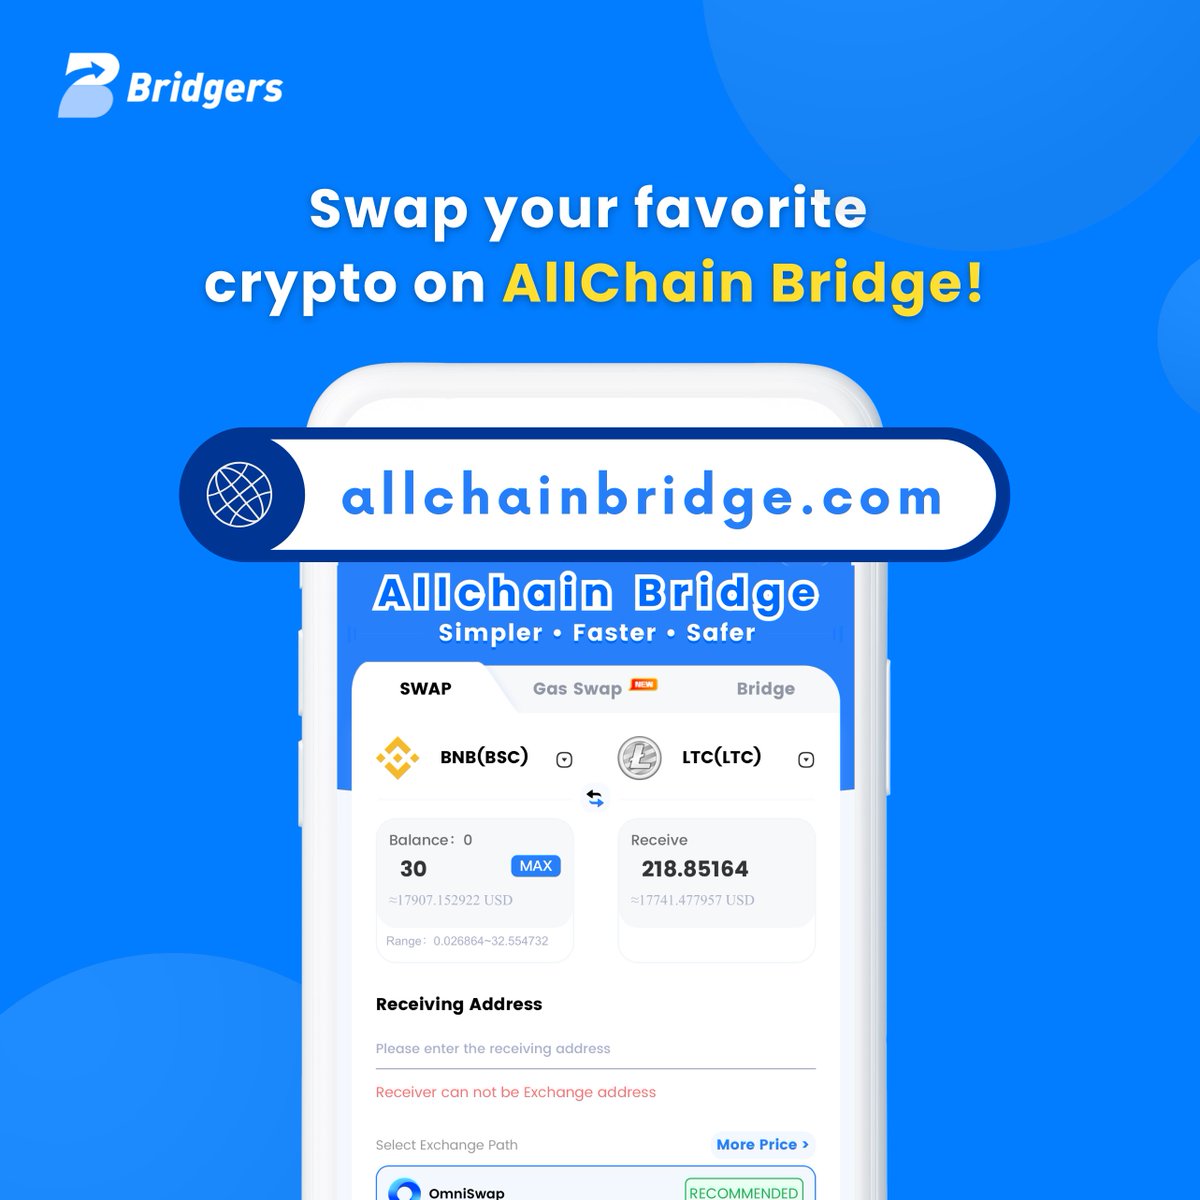 AllChain Bridge allows you to exchange over 400+ #cryptocurrencies in multiple network. We offer: ✅ Best Exchange rates ✅ 50% discount on swap fees ✅ Wide selection of cryptocurrencies ✅ Fast, secure, and simple platform 🔗 Swap now: allchainbridge.com